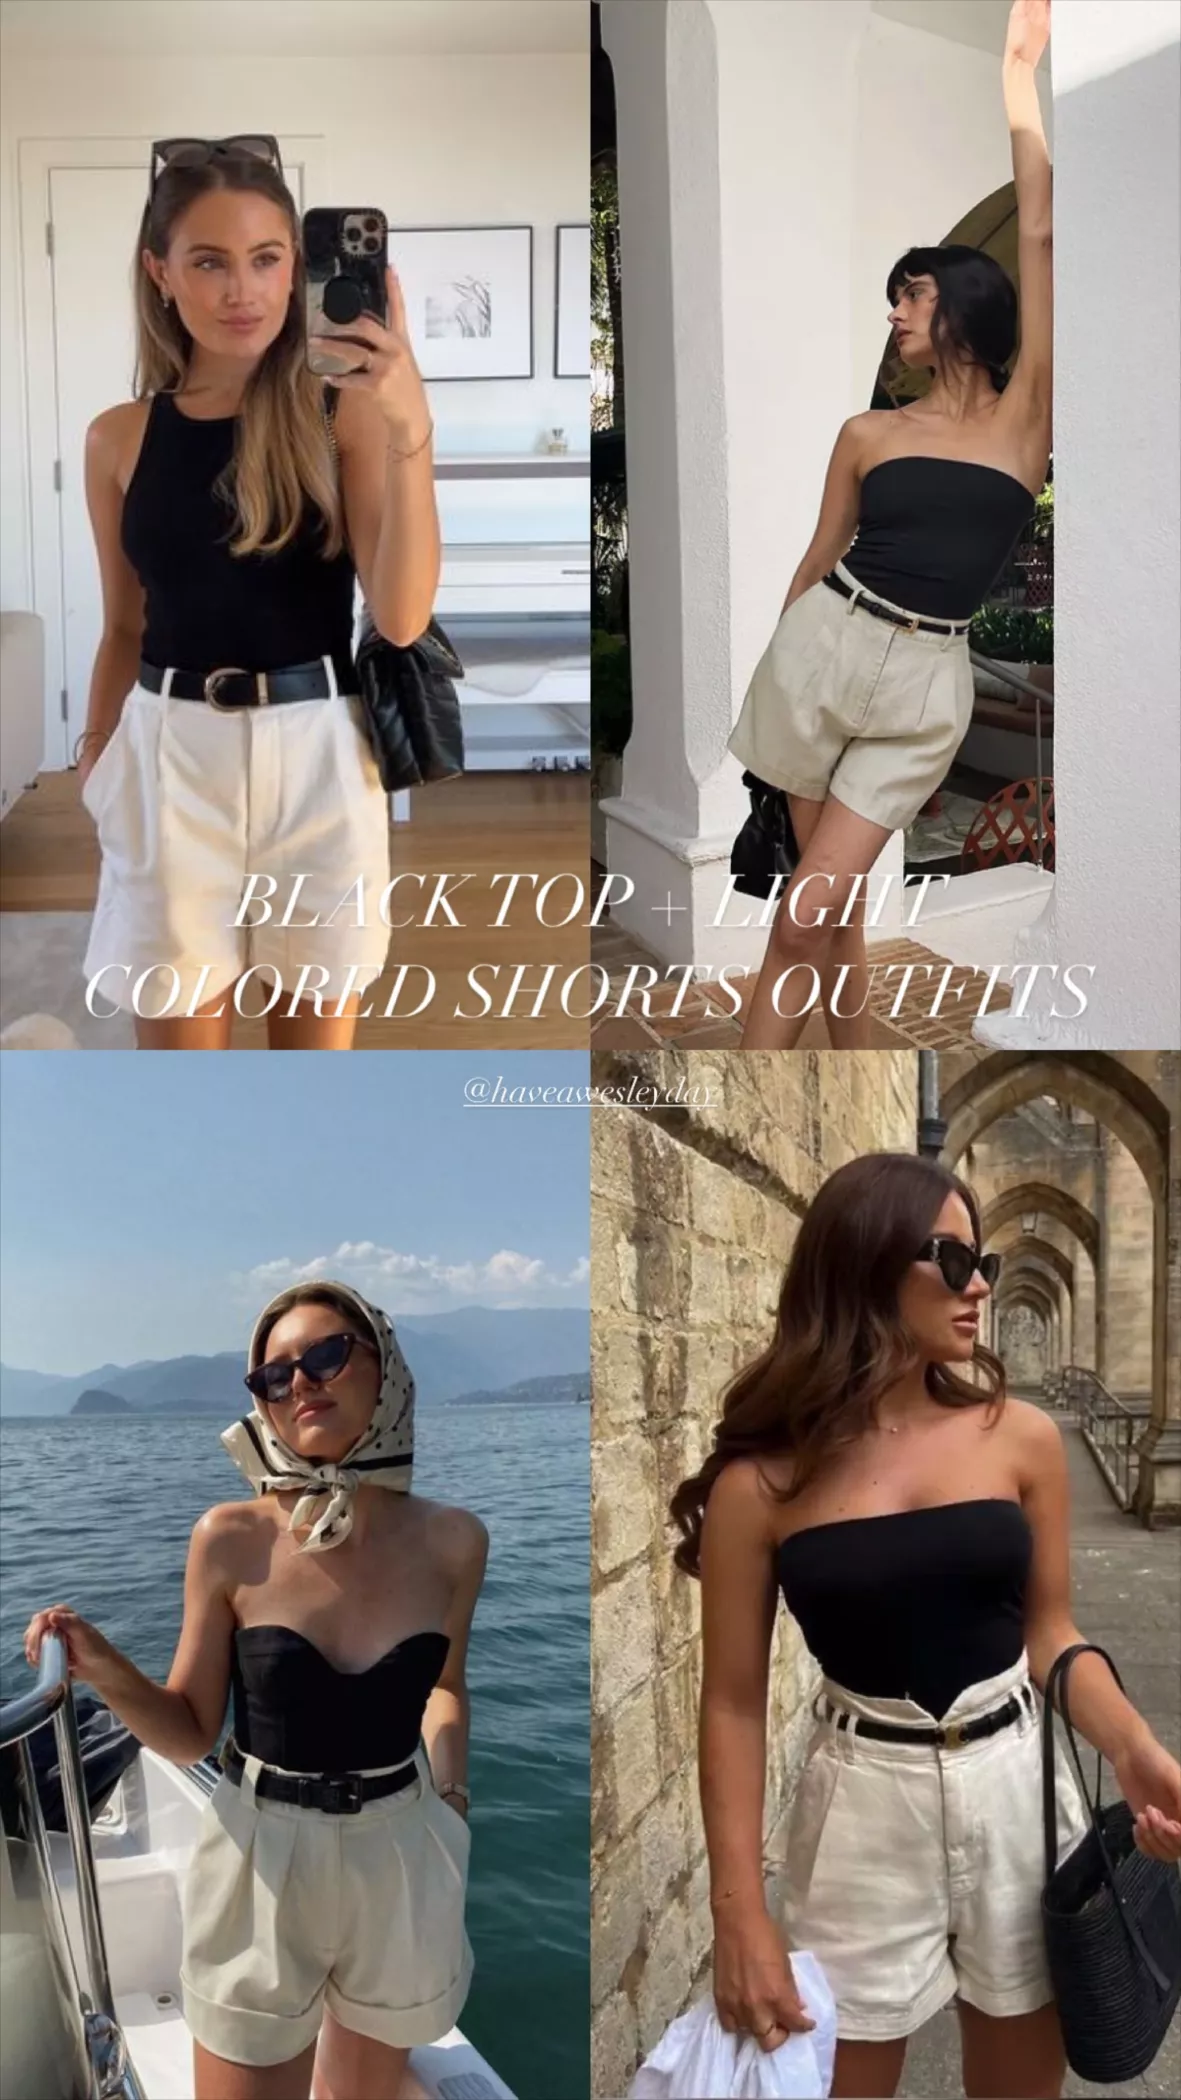 How To Wear Shorts - Summer Outfit Ideas